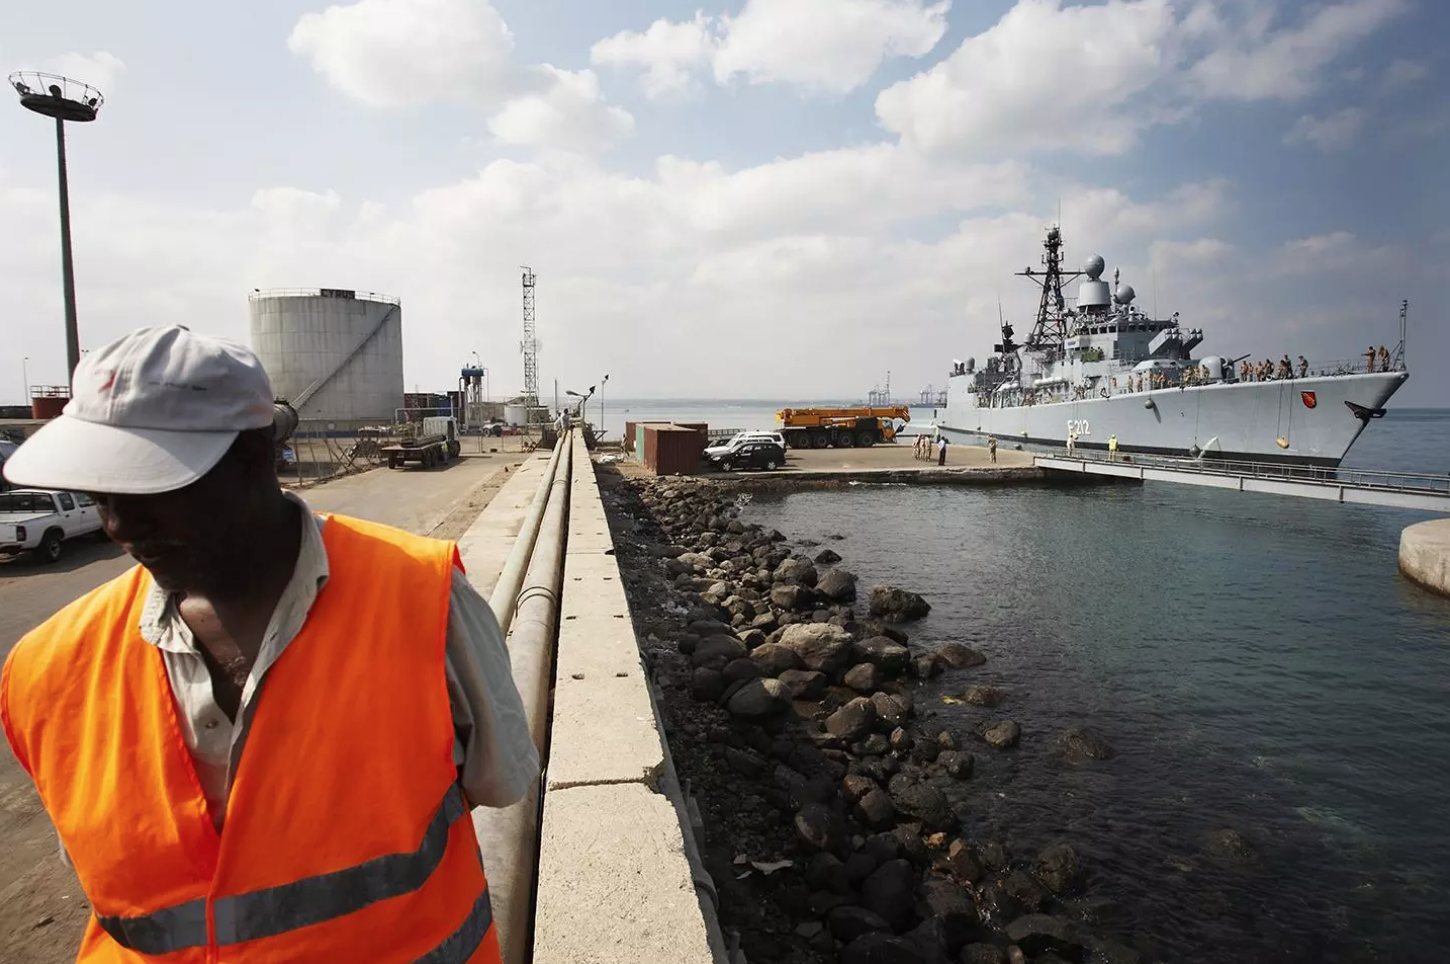 A port in Djibouti, where Russia was barred from building a military base. Image by Carsten Koall. Djibouti, 2018. 